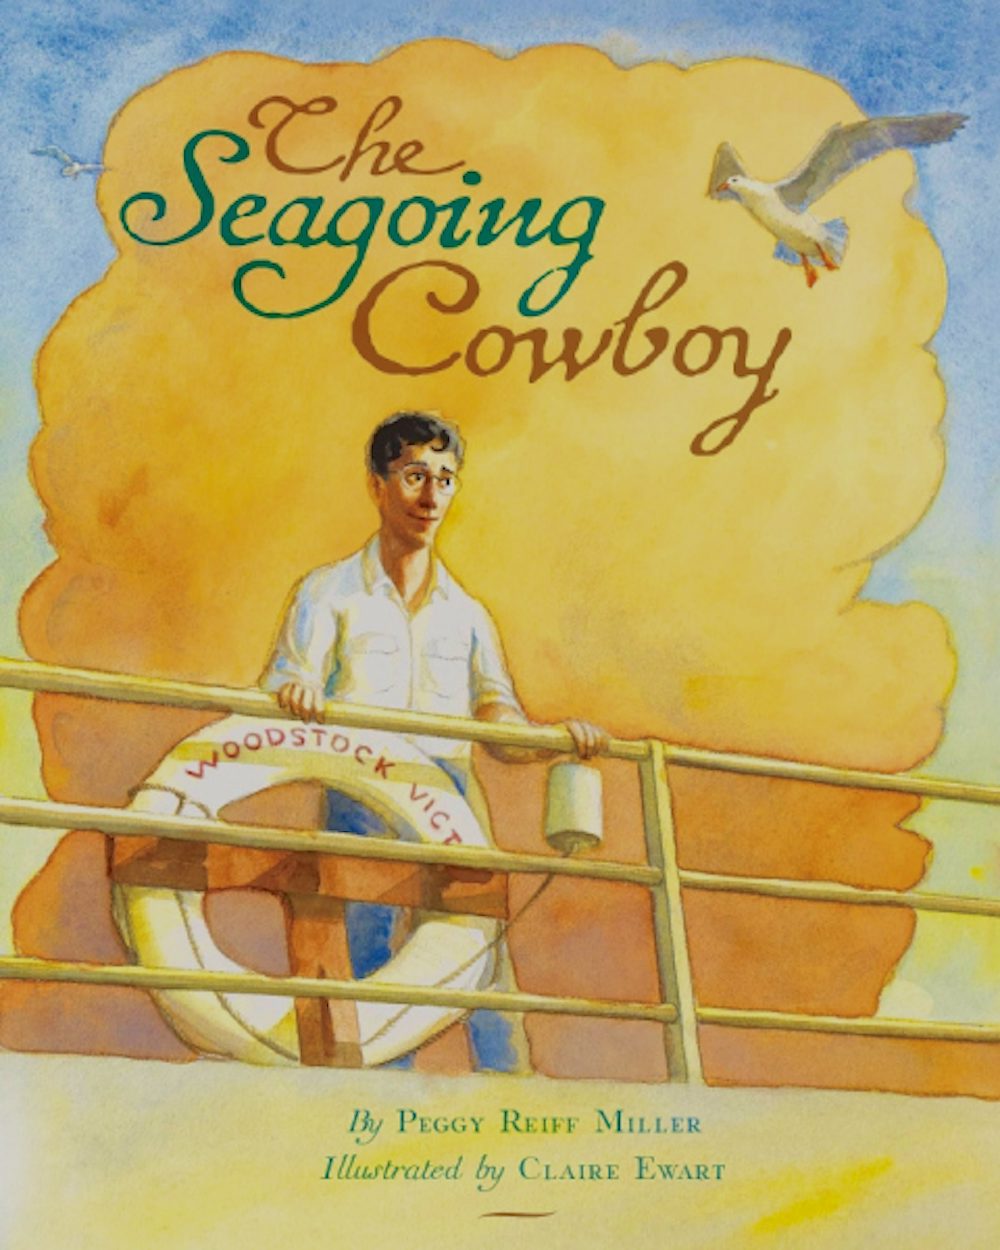 Peggy Reiff Miller's book, The Seagoing Cowboy